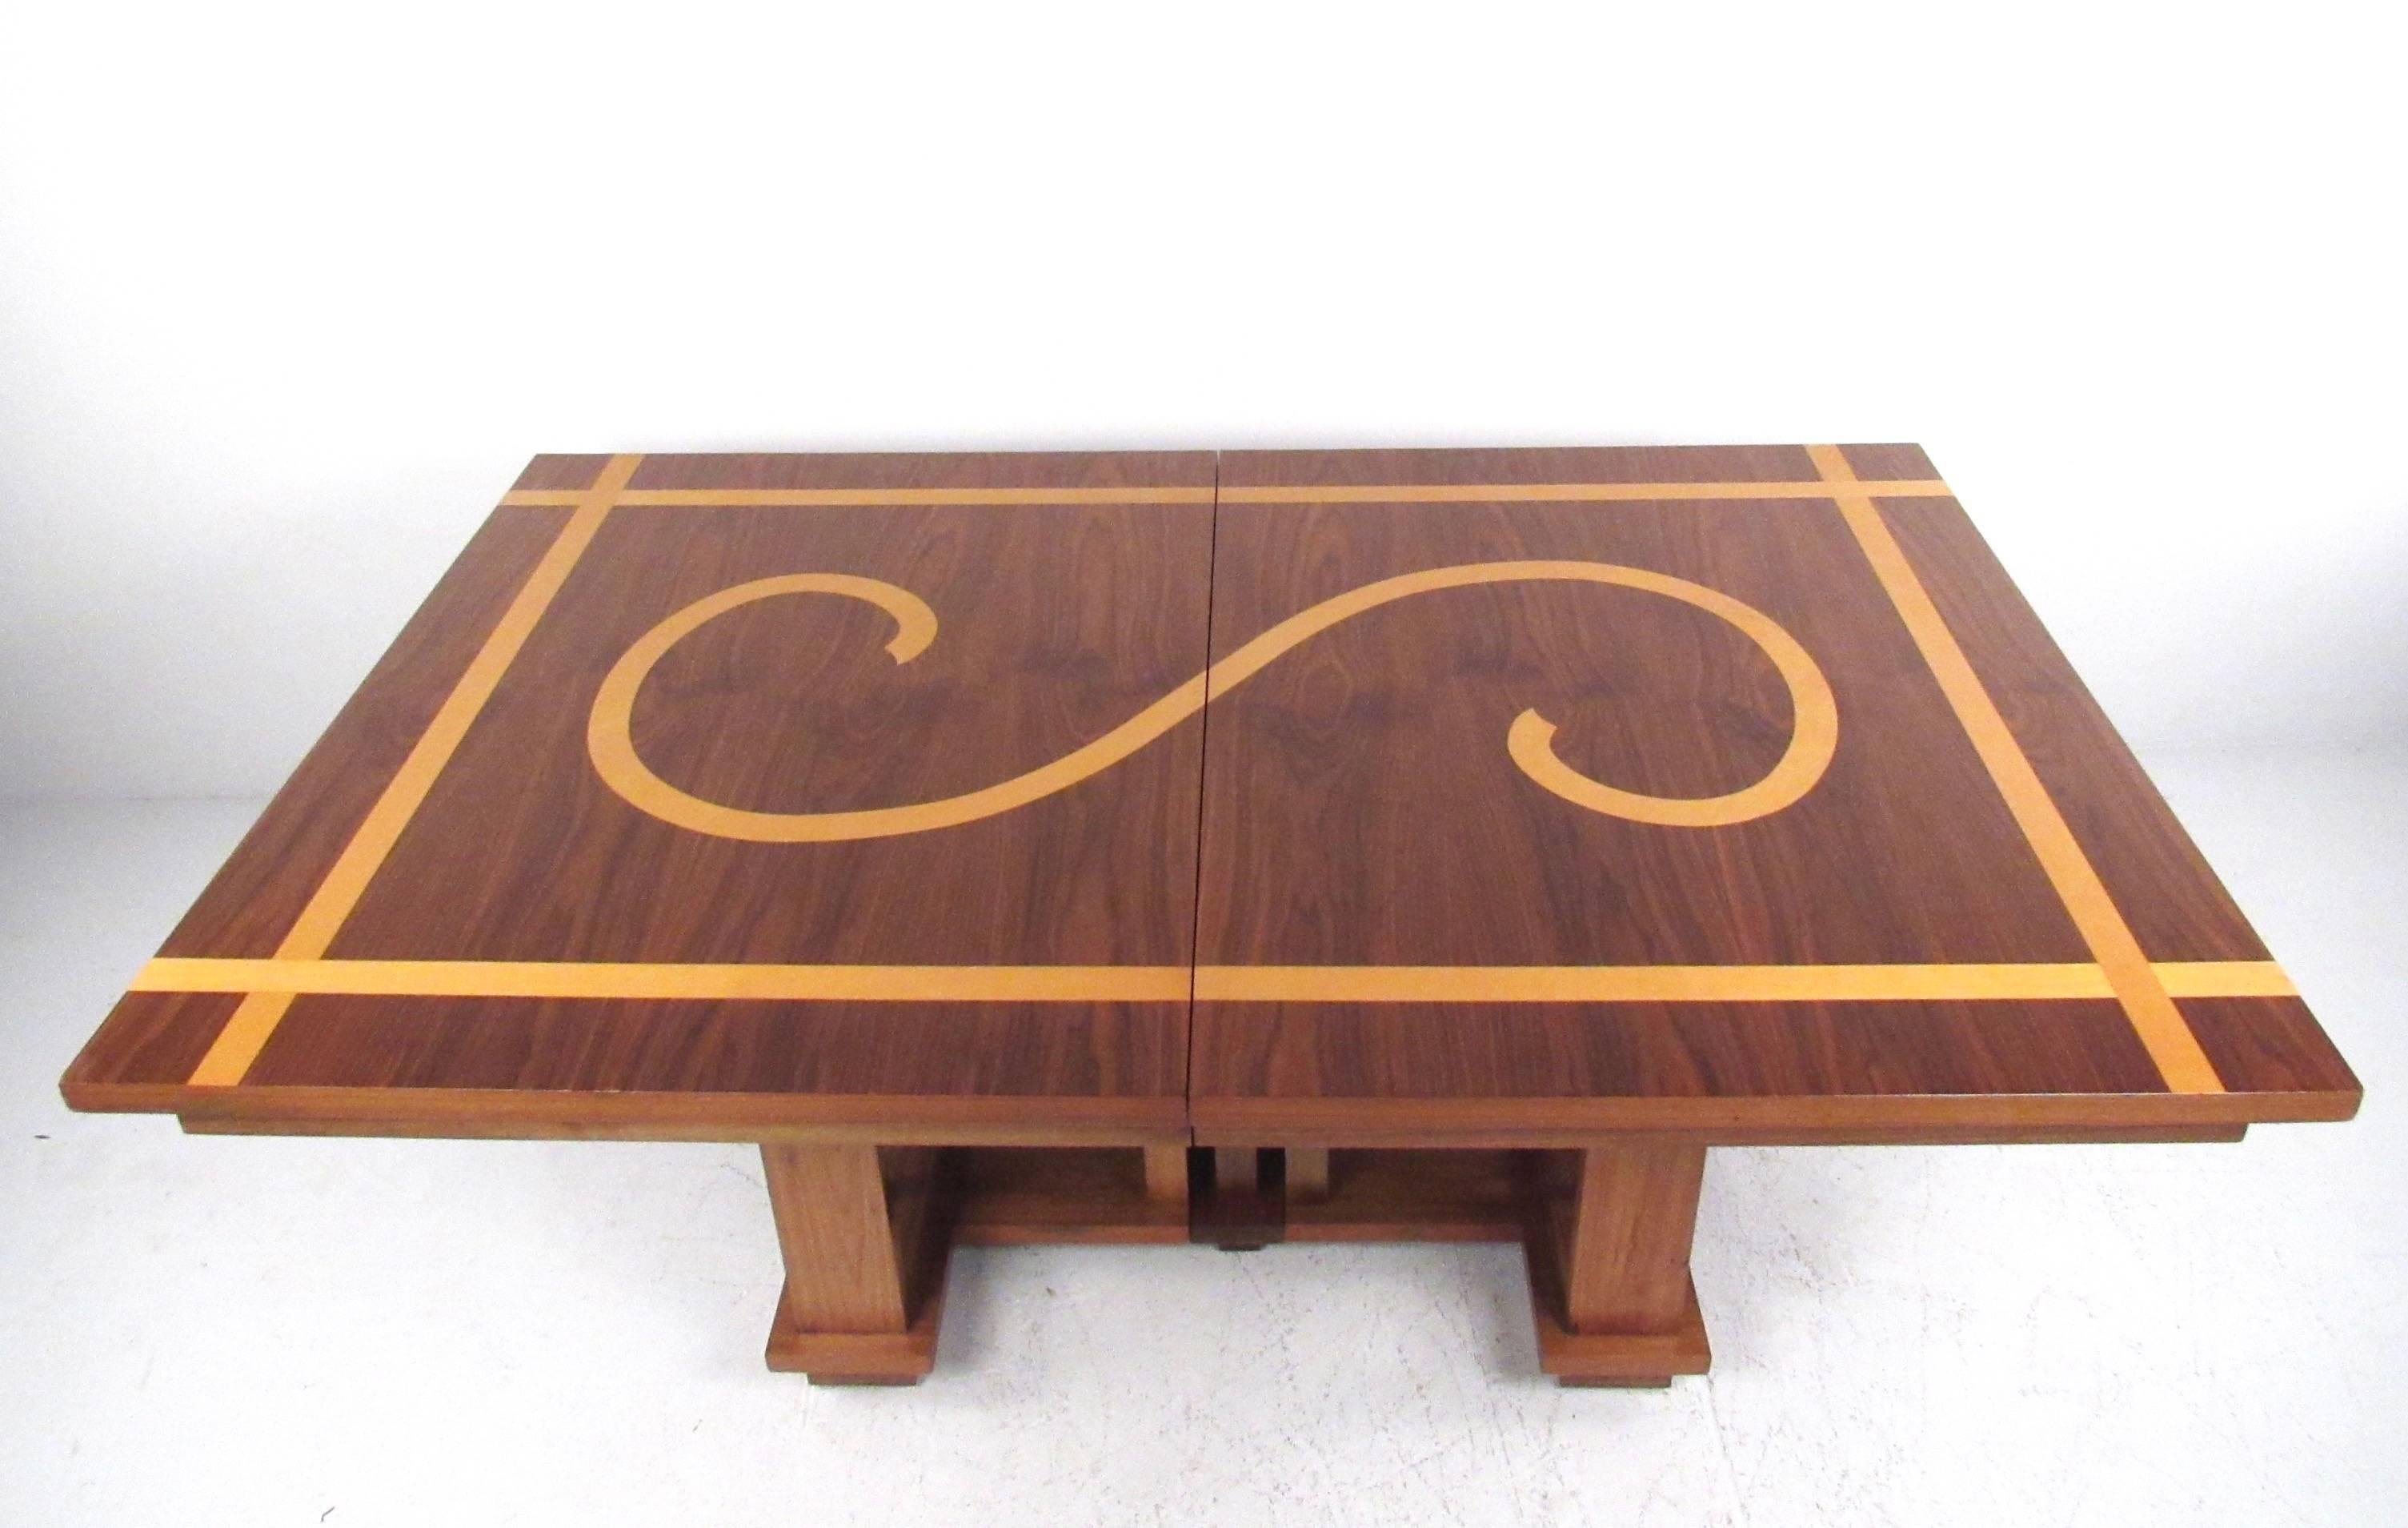 This vintage modern dining table features a rich hardwood table with decorative oak inlay. The table opens from 70.25w to include an additional four leaves, opening up to twice its original size. The sculpted style of the base is reminiscent of